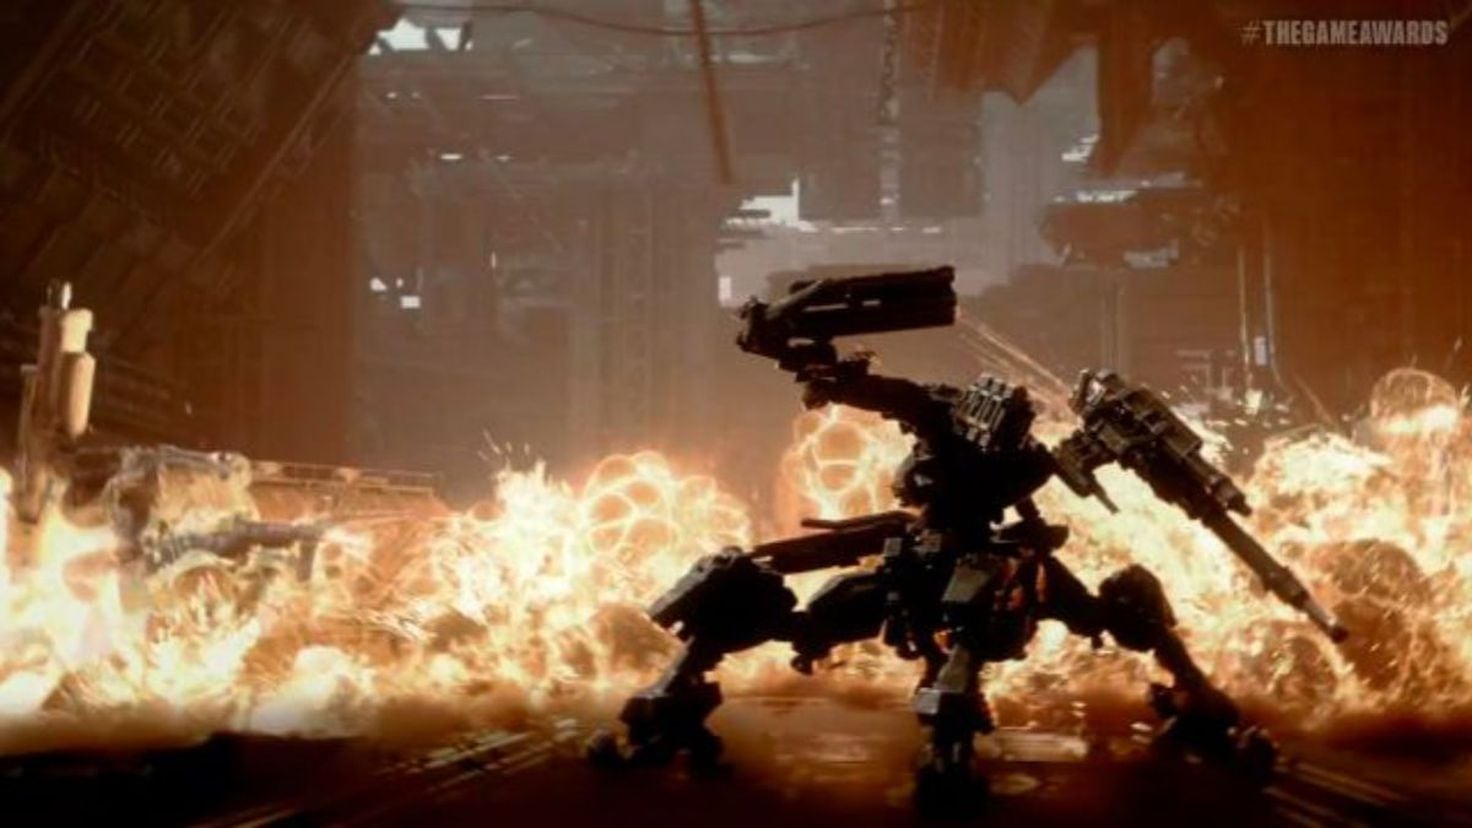 The Armored Core series isn't finished yet according to From